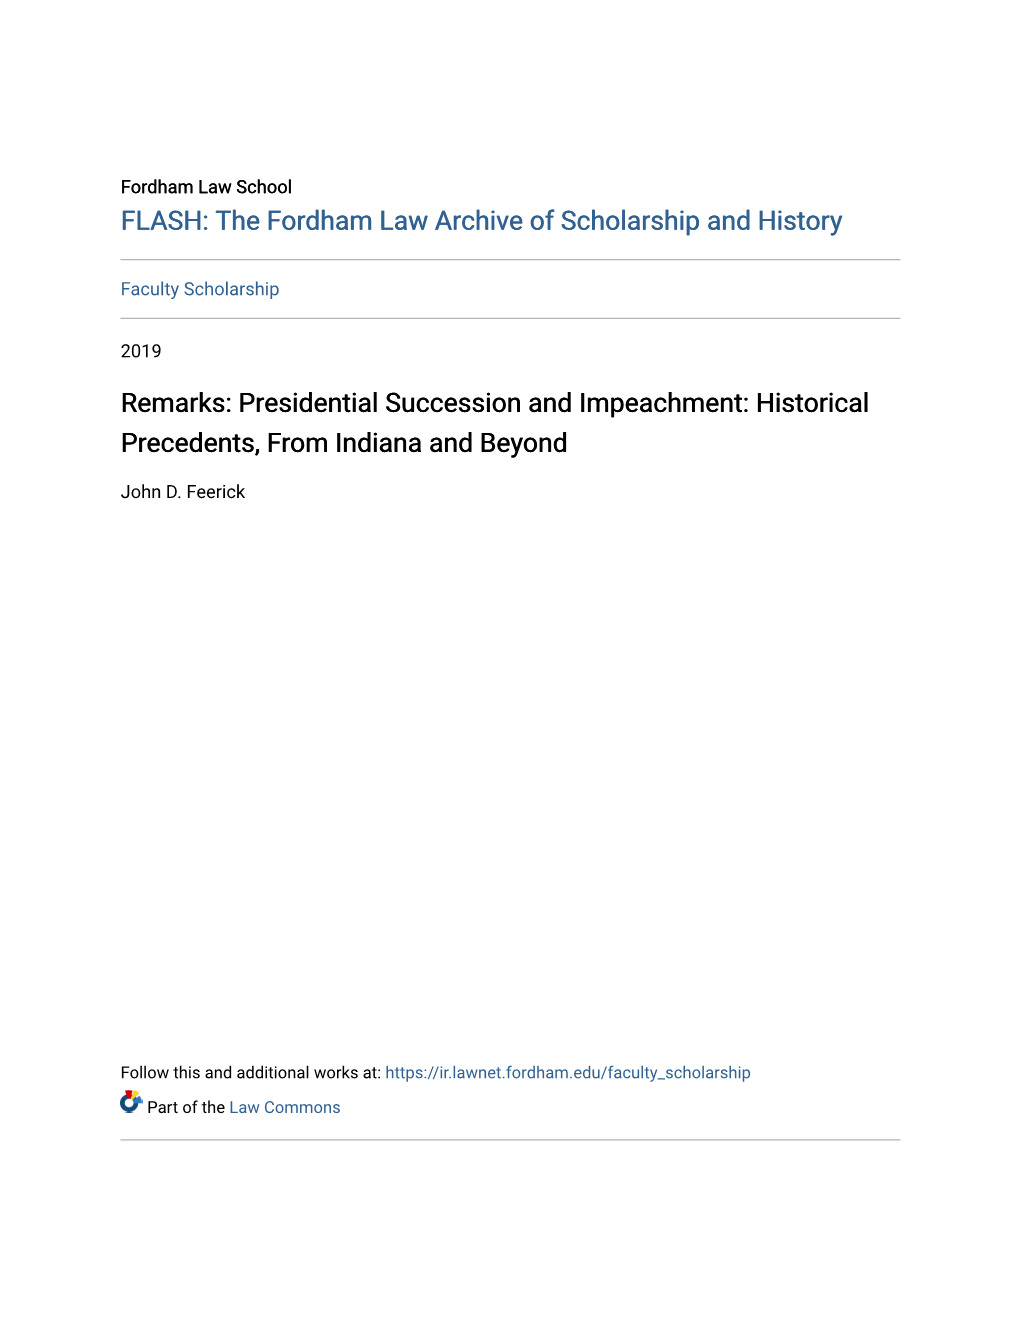 Presidential Succession and Impeachment: Historical Precedents, from Indiana and Beyond